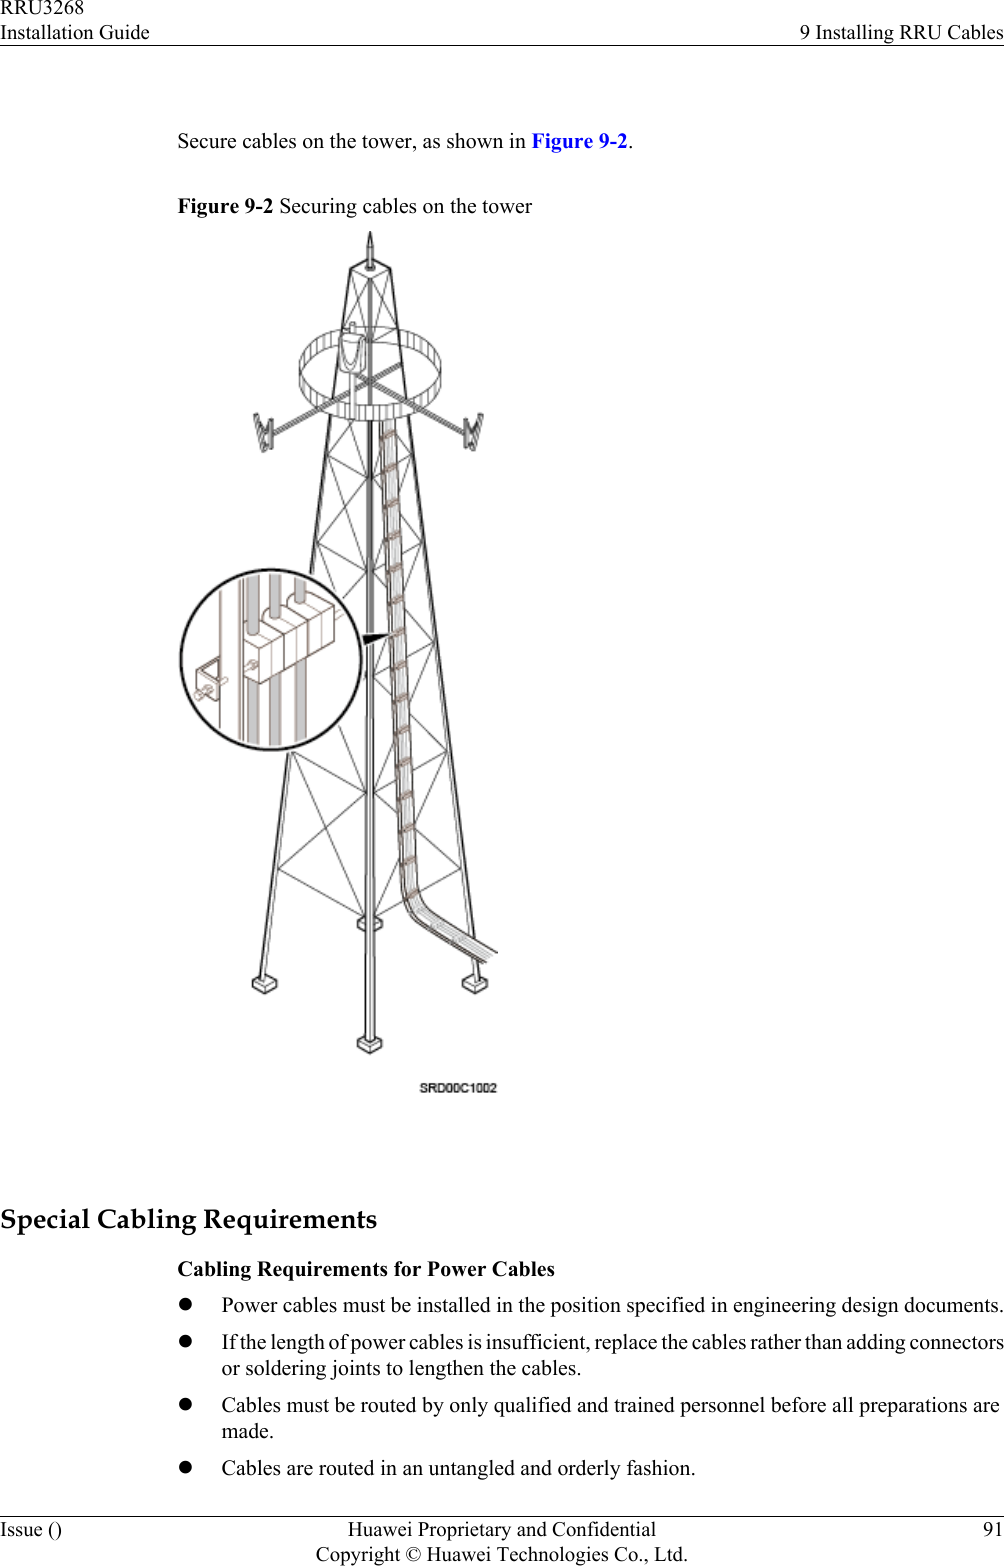  Secure cables on the tower, as shown in Figure 9-2.Figure 9-2 Securing cables on the tower Special Cabling RequirementsCabling Requirements for Power CableslPower cables must be installed in the position specified in engineering design documents.lIf the length of power cables is insufficient, replace the cables rather than adding connectorsor soldering joints to lengthen the cables.lCables must be routed by only qualified and trained personnel before all preparations aremade.lCables are routed in an untangled and orderly fashion.RRU3268Installation Guide 9 Installing RRU CablesIssue () Huawei Proprietary and ConfidentialCopyright © Huawei Technologies Co., Ltd.91